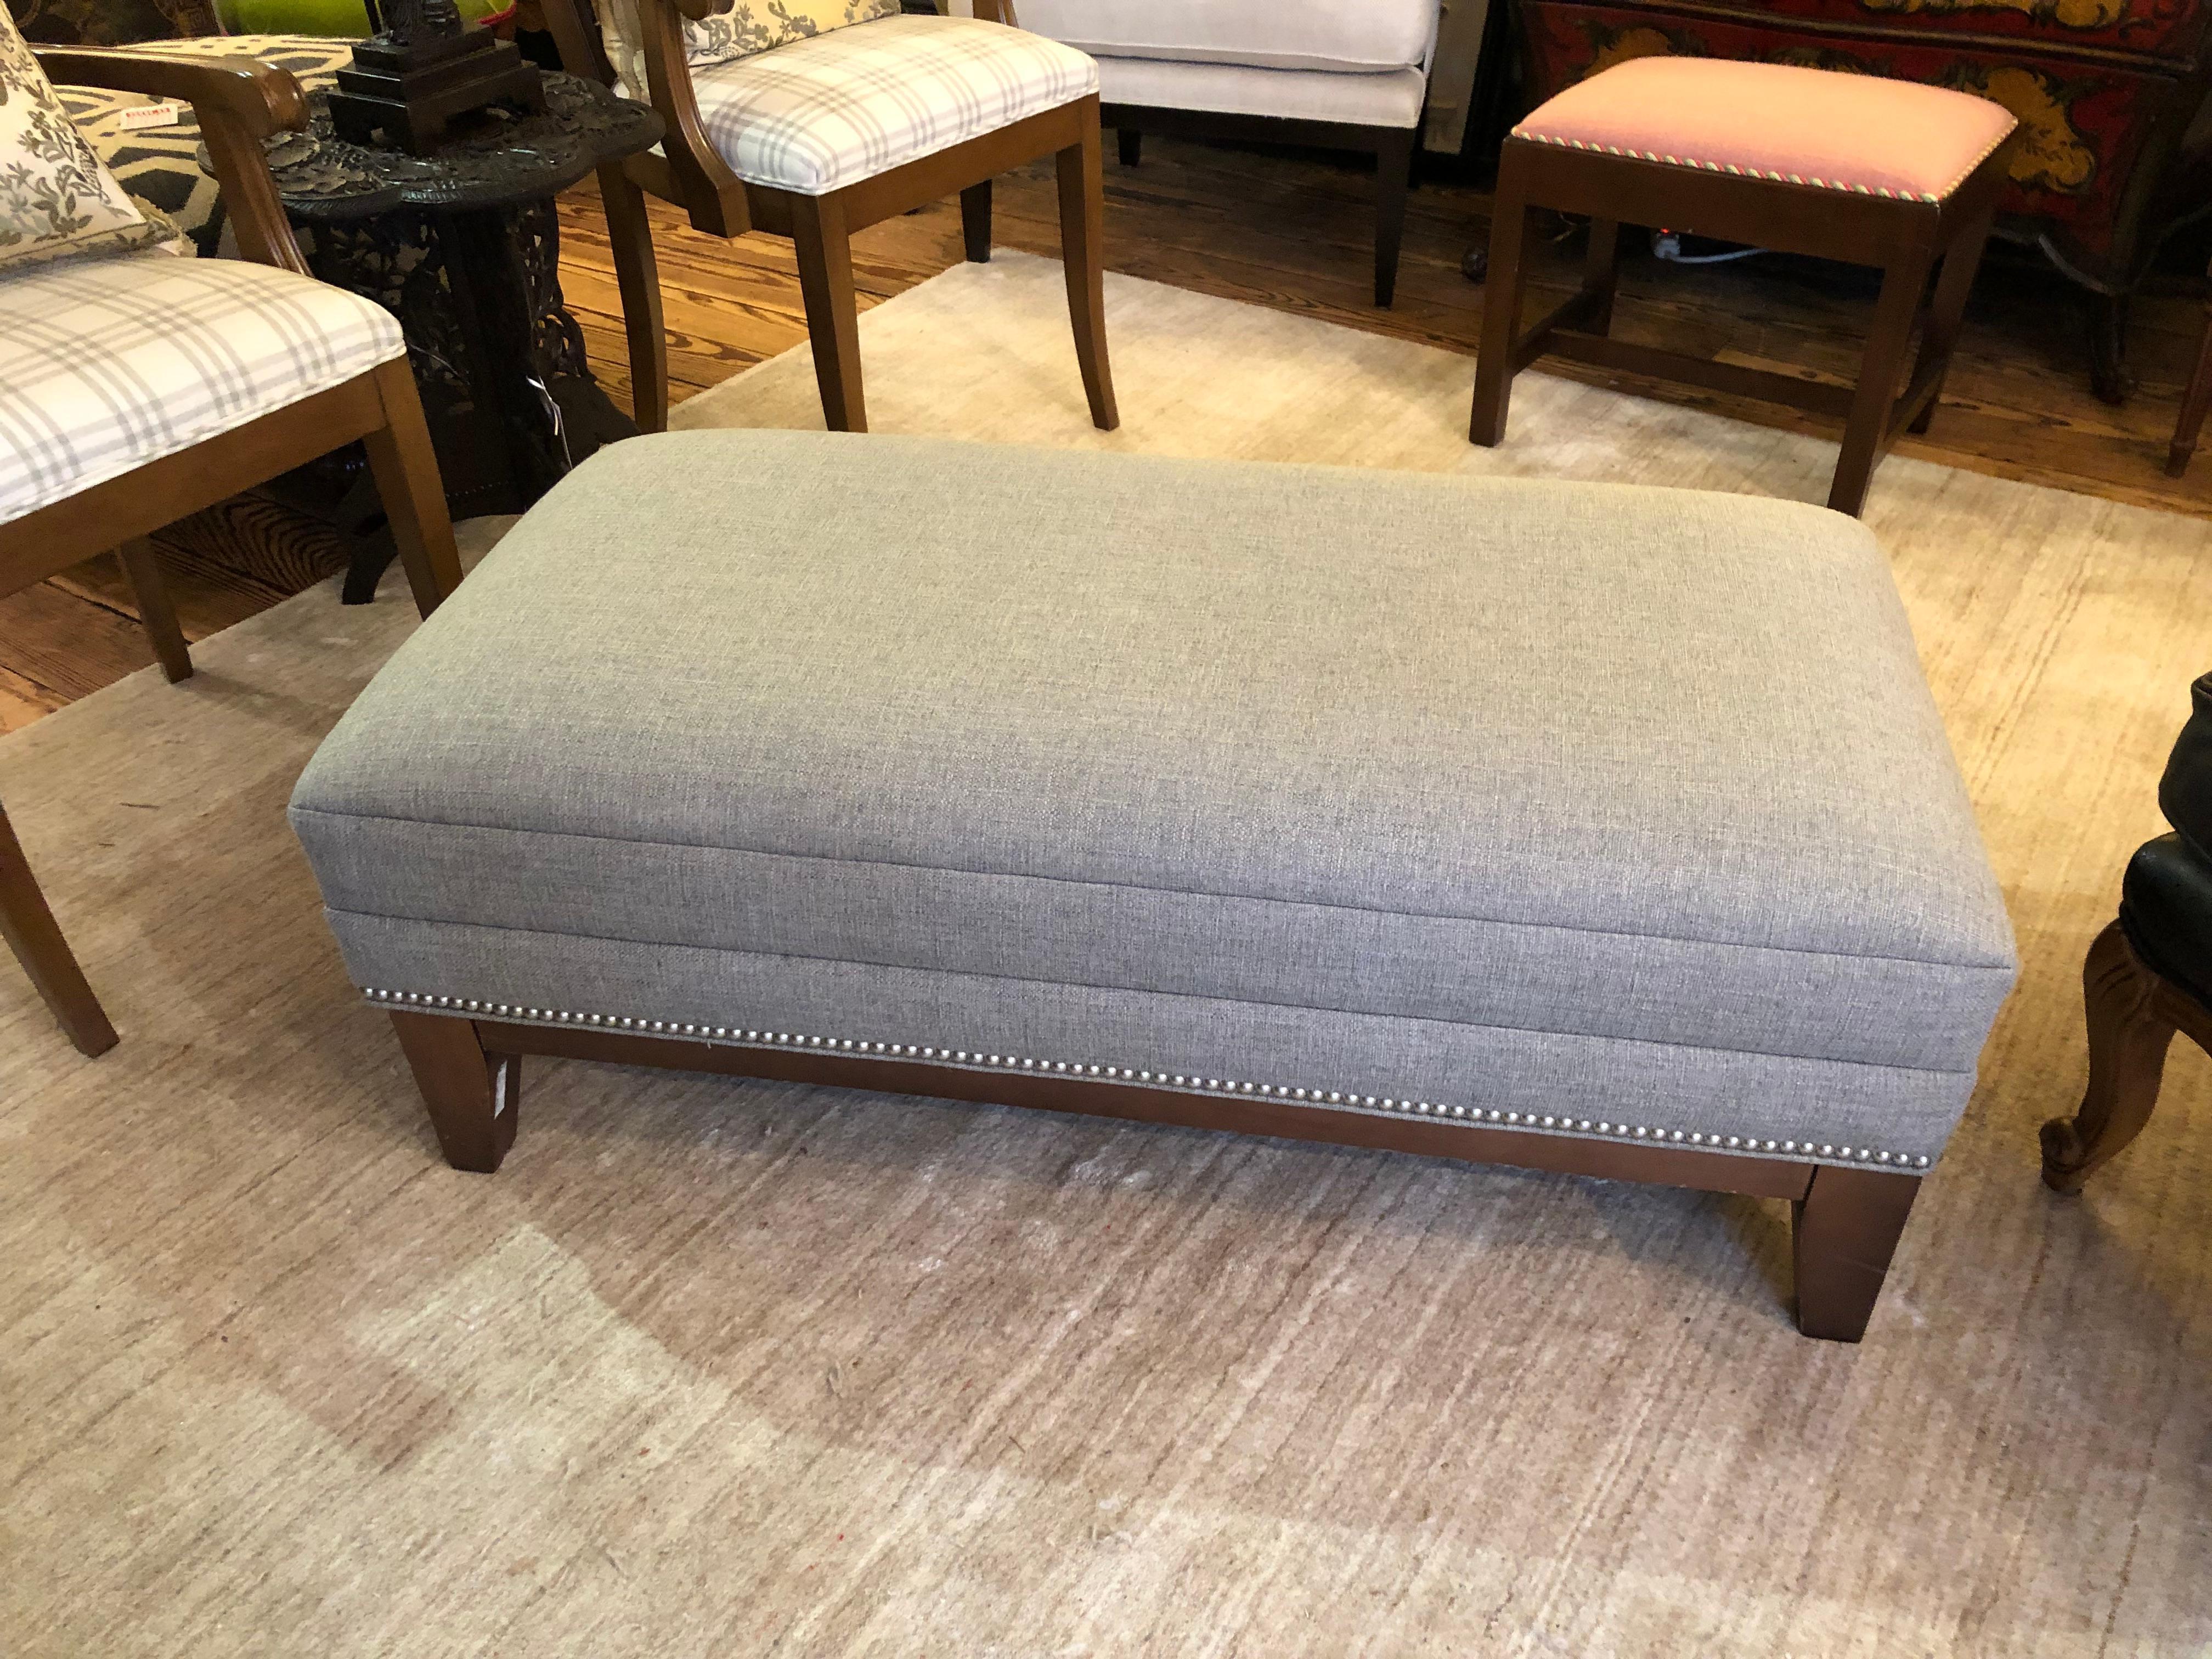 A versatile and handsome greyish beige (greige) upholstered rectangular ottoman finished with nailheads. Great for extra seating, a place to put your feet, or used as a coffee table. Good at the end of a bed too. Purchased at ABC Carpet in NY about